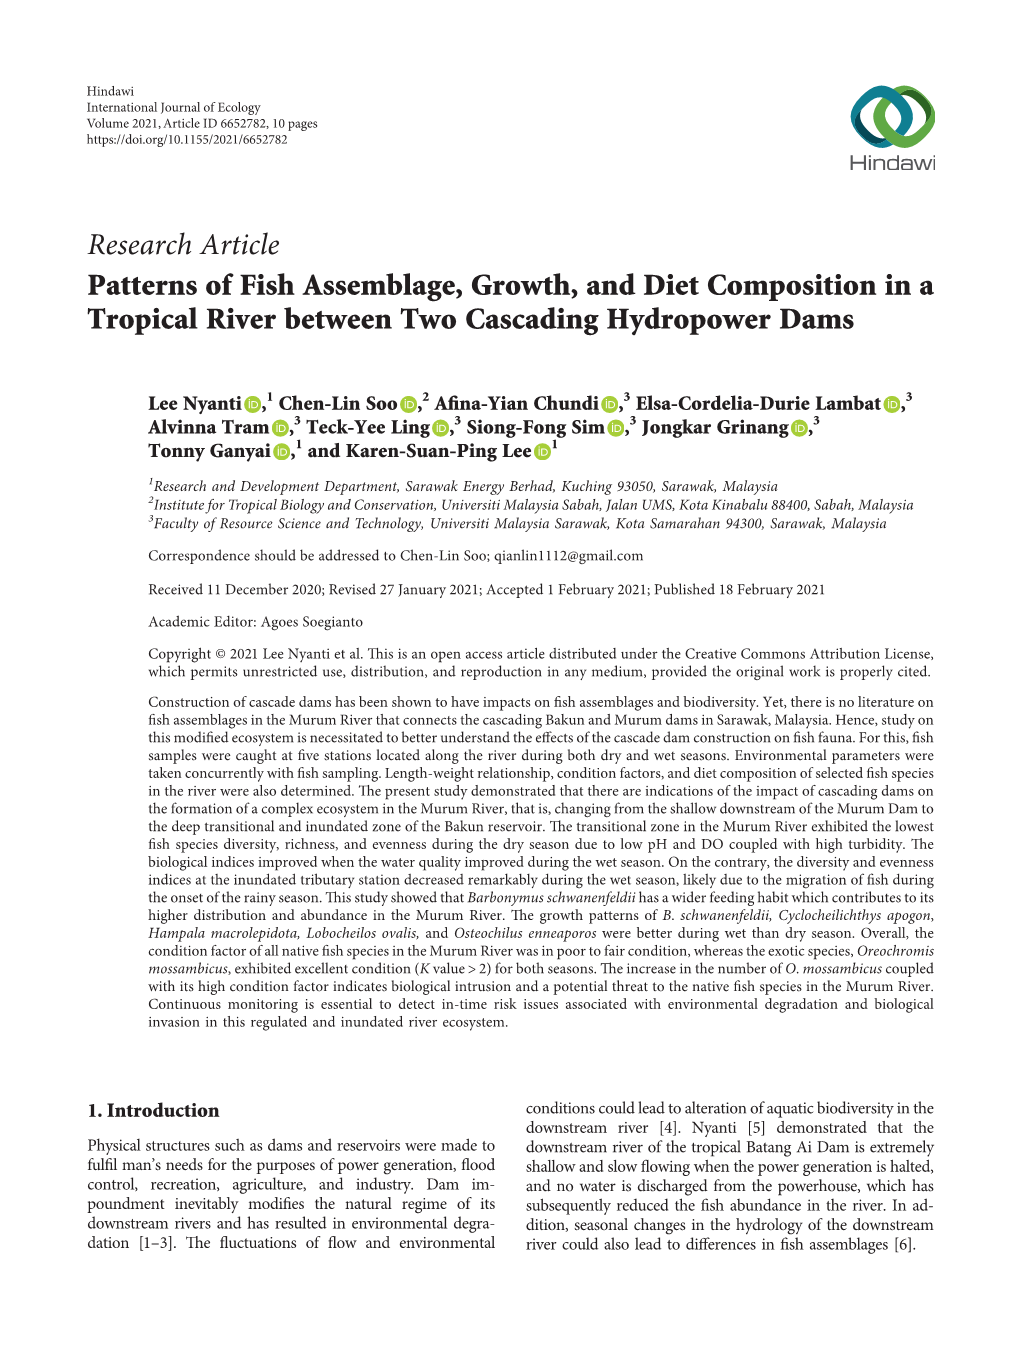 Research Article Patterns of Fish Assemblage, Growth, and Diet Composition in a Tropical River Between Two Cascading Hydropower Dams